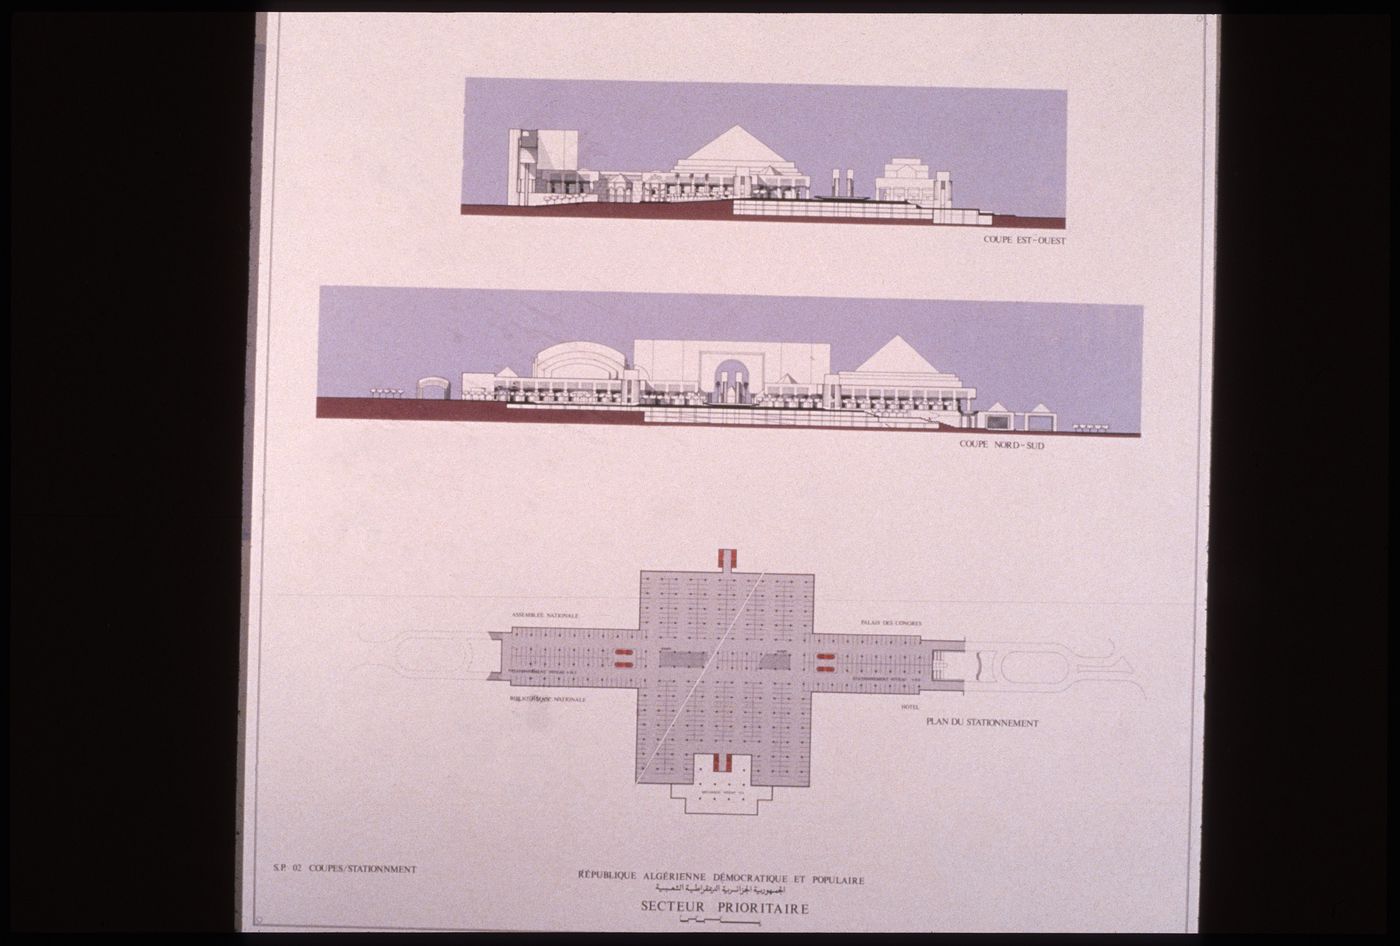 View of sections and plan showing parking for Hamma Government Complex, Algiers, Algeria